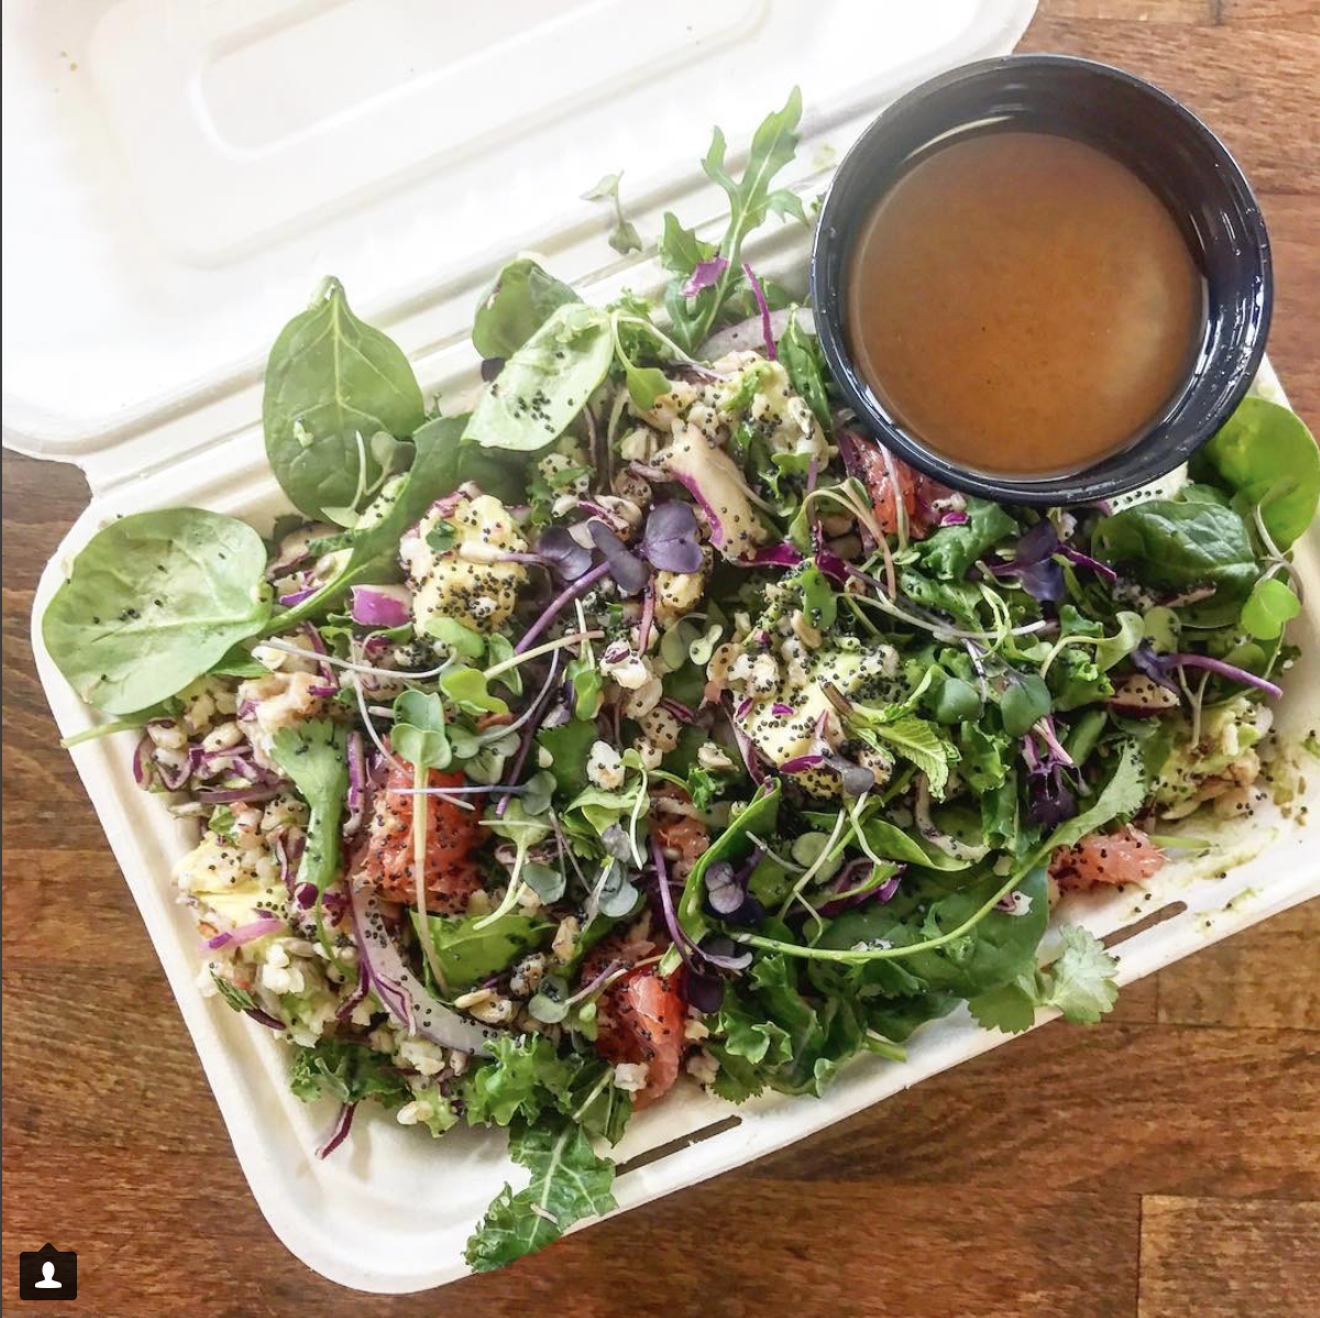 Stephanie Hoban, chef and owner behind Ripe Cuisine, is finally taking her vegan food truck concept to a brick-and-mortar.